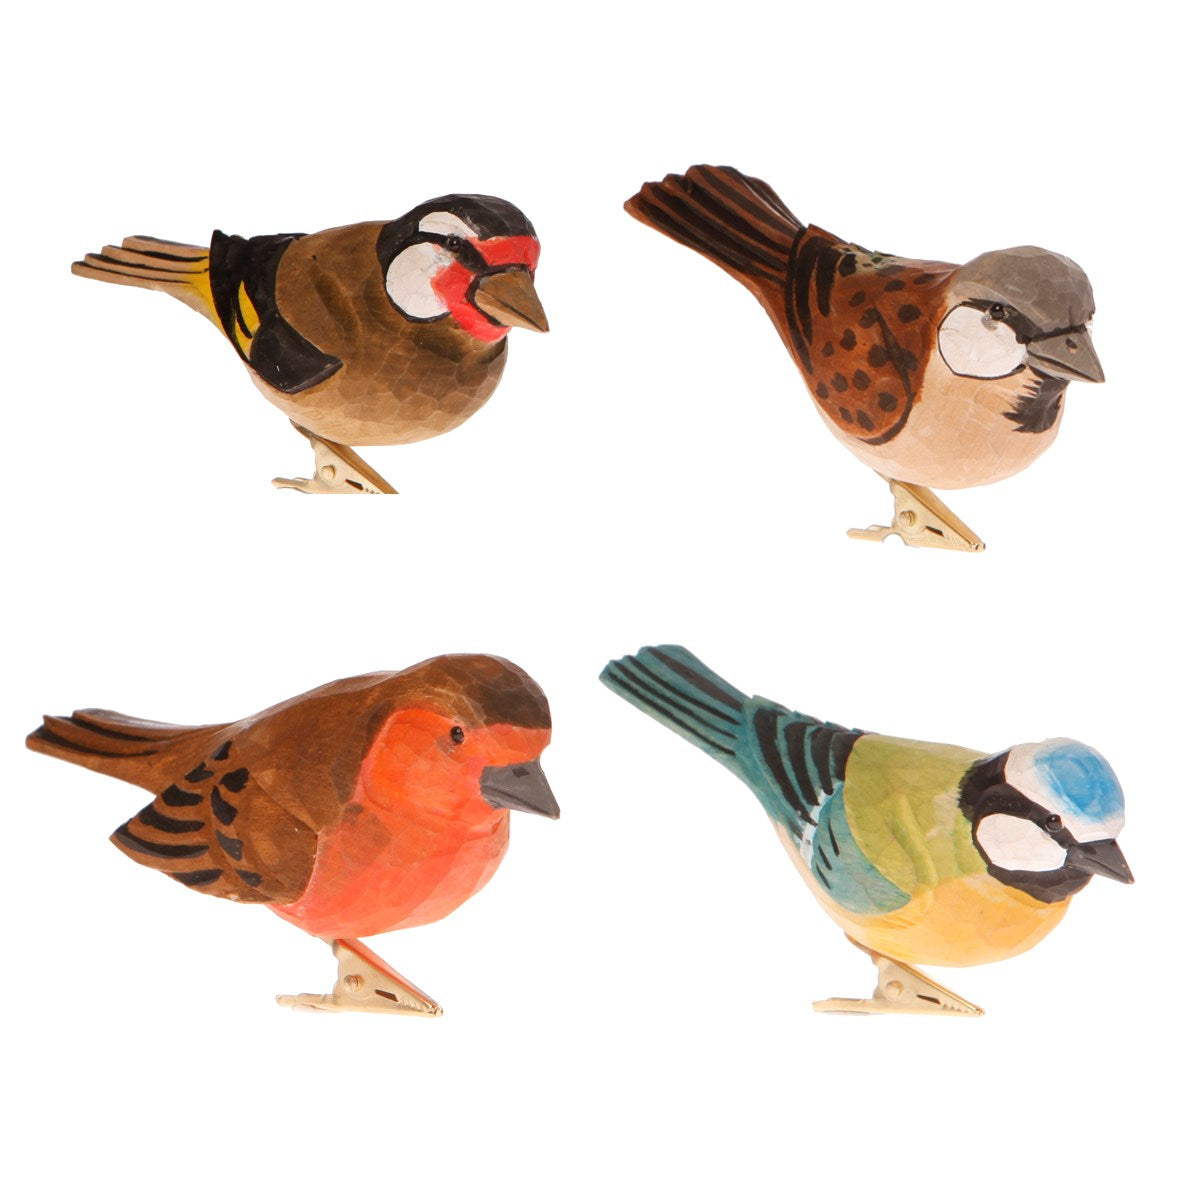 A collection of blue tit, robins, goldfinch and sparrow wooden bird clip decorations